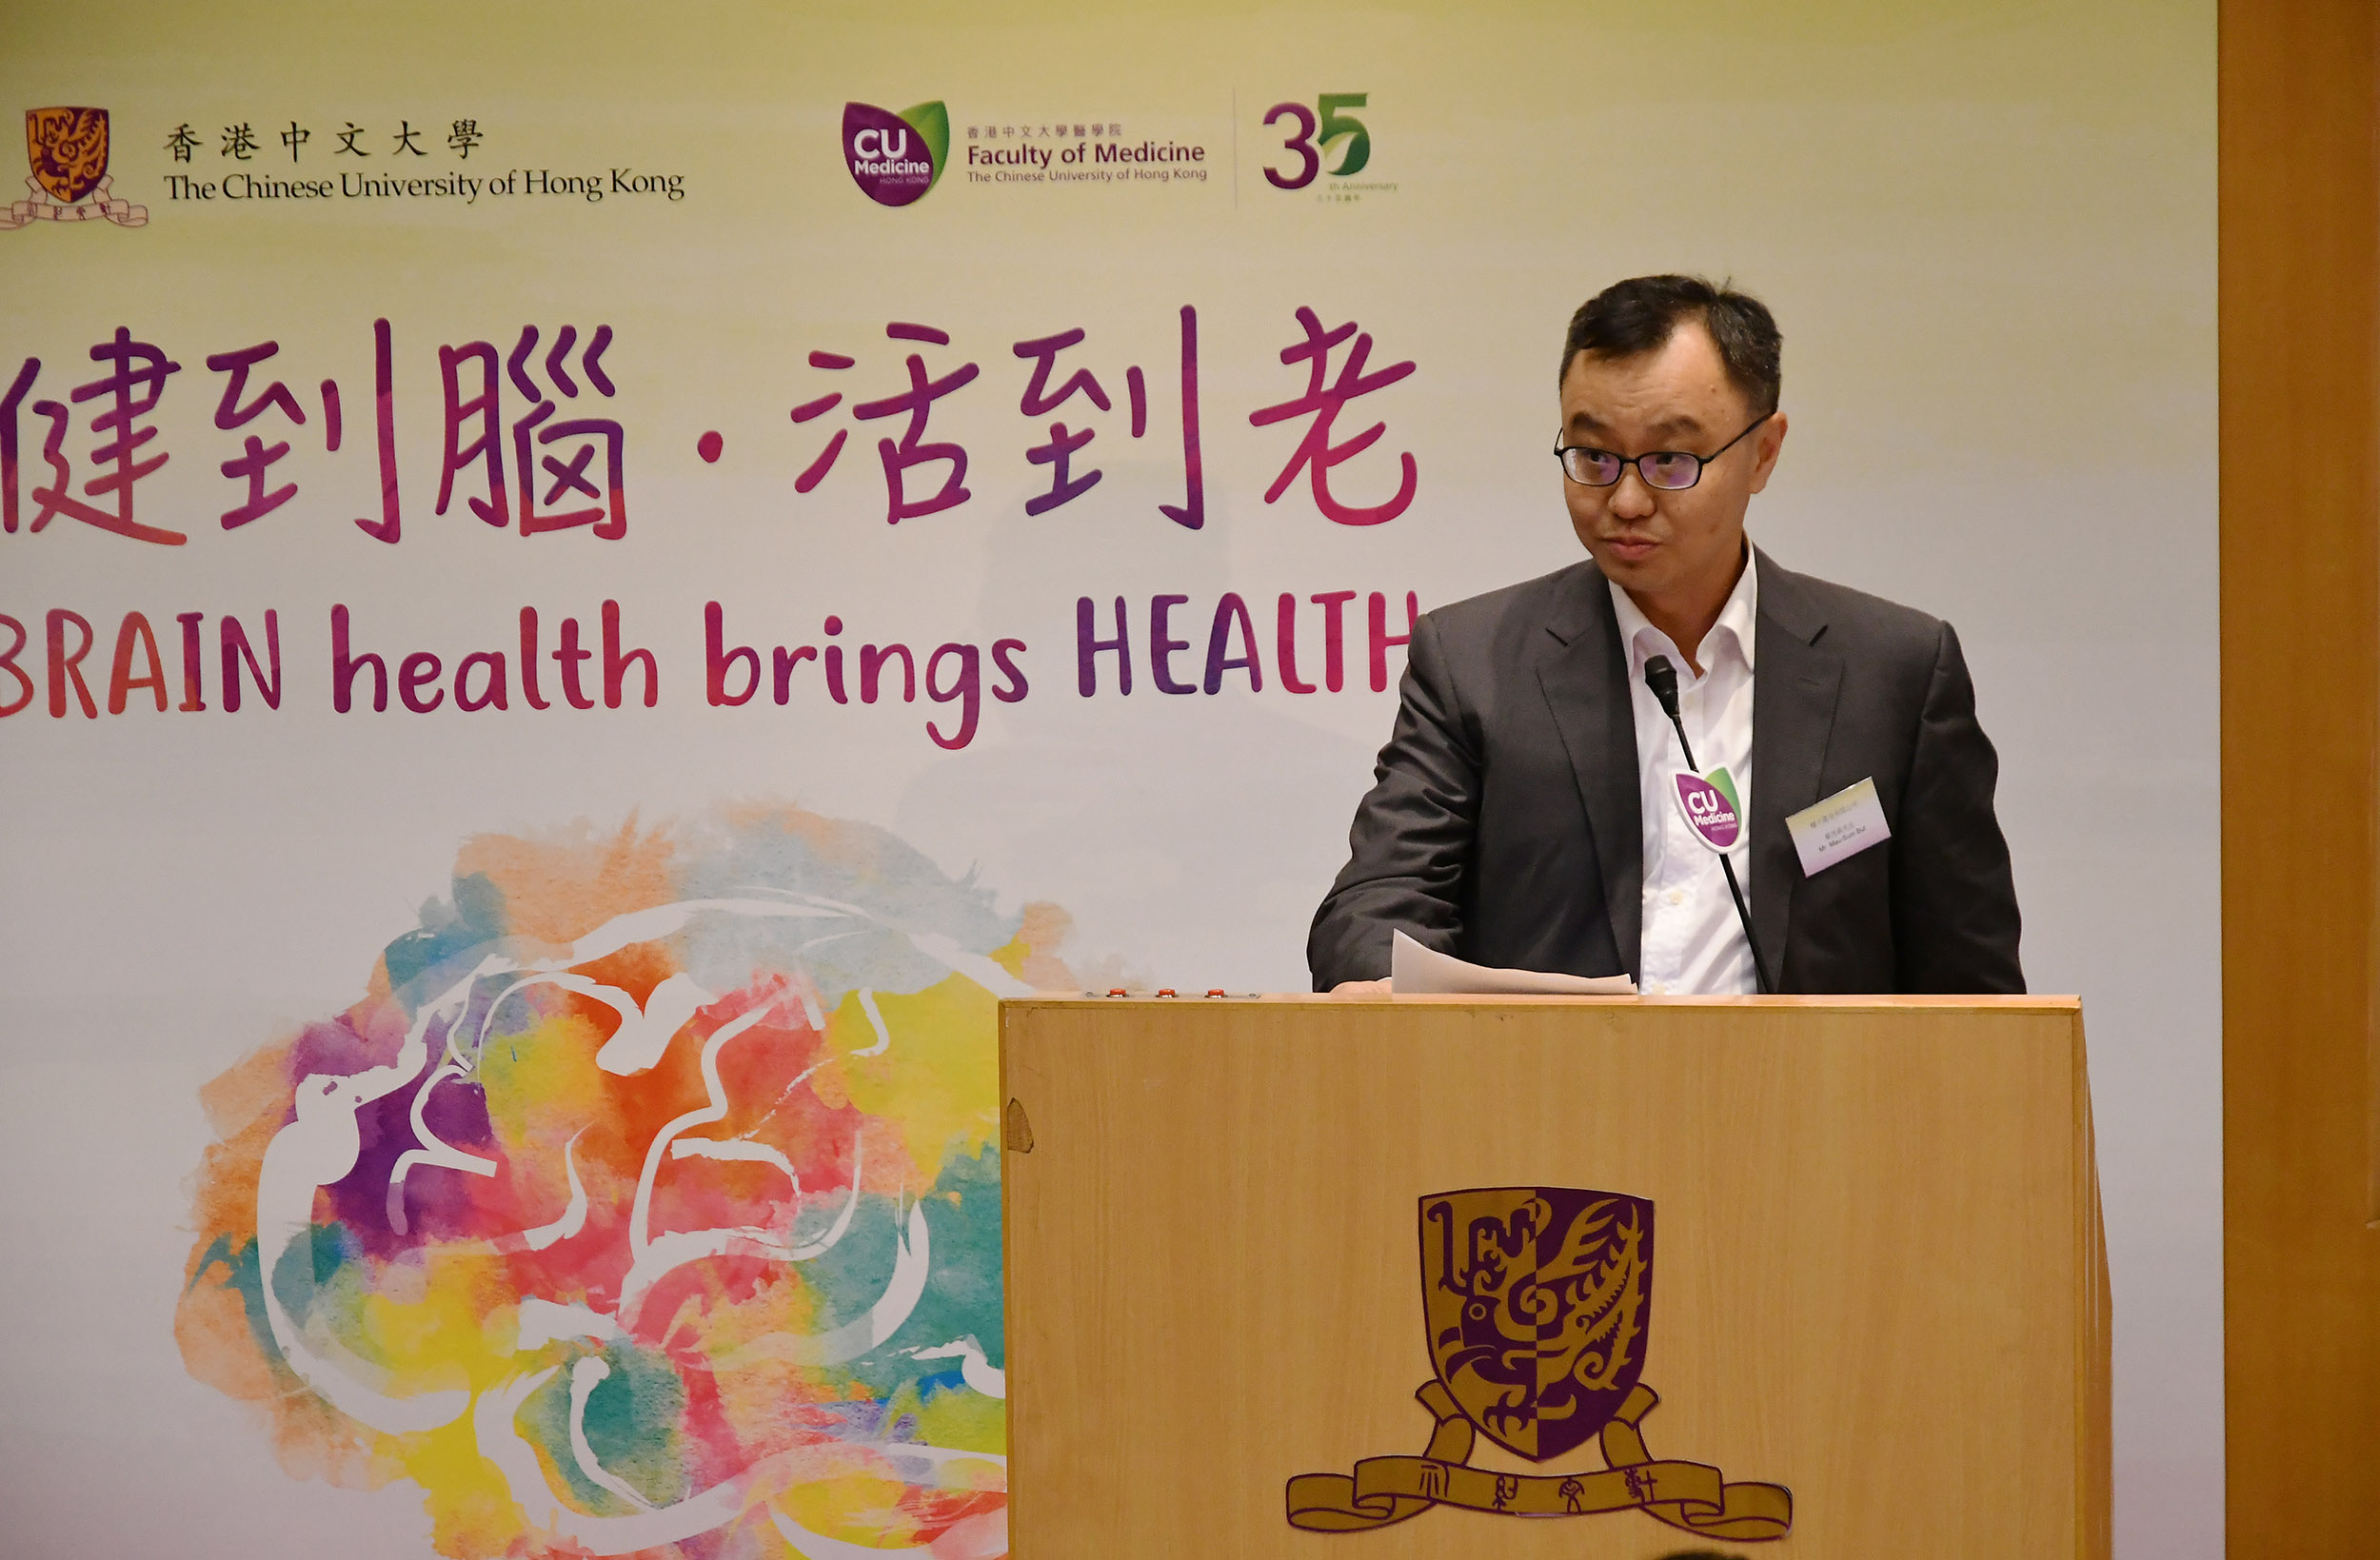 Mr. Mau Sum BUT, Board member of the Seeds Foundation Limited wishes their support to CUHK Medicine’s research can result in simple and accessible screening tools for AD, so as to provide timely treatment for those who suffered.